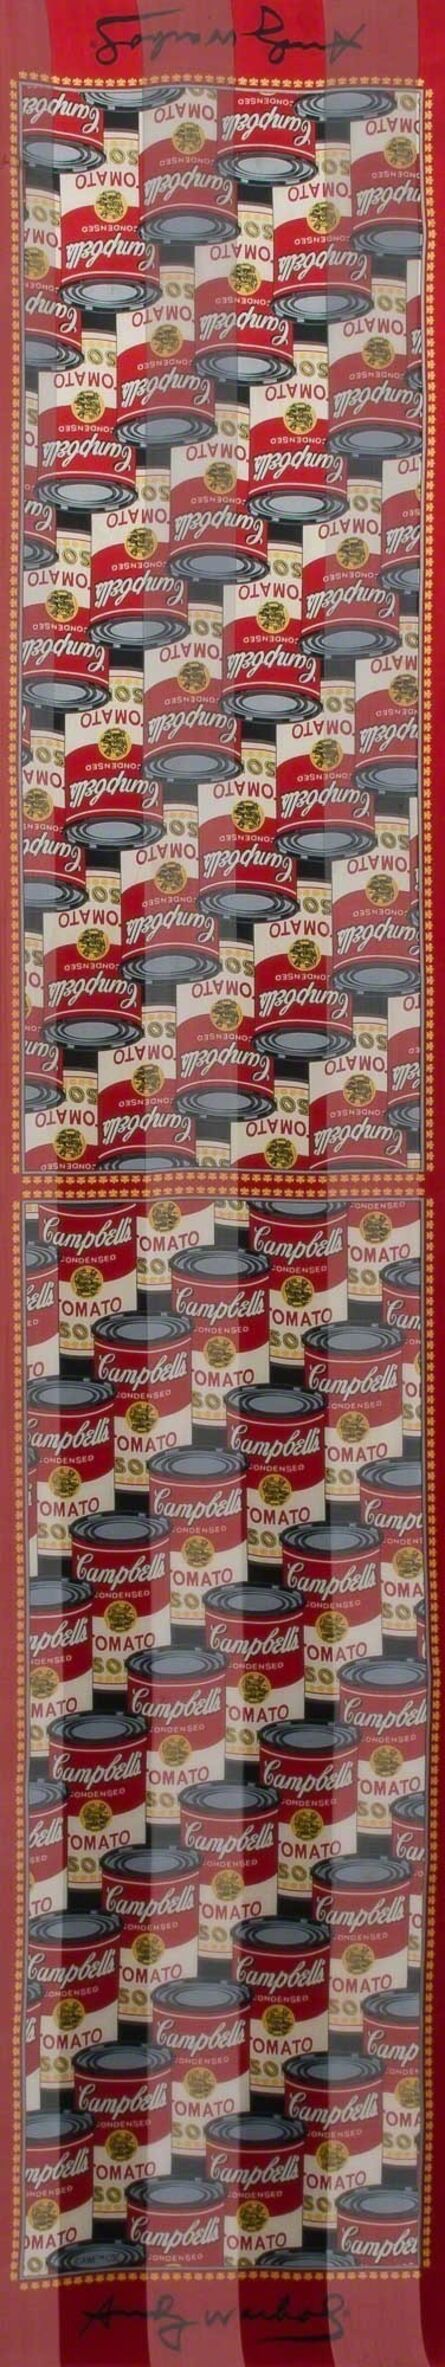 Andy Warhol, ‘CAMPBELL'S TOMATO SOUP’